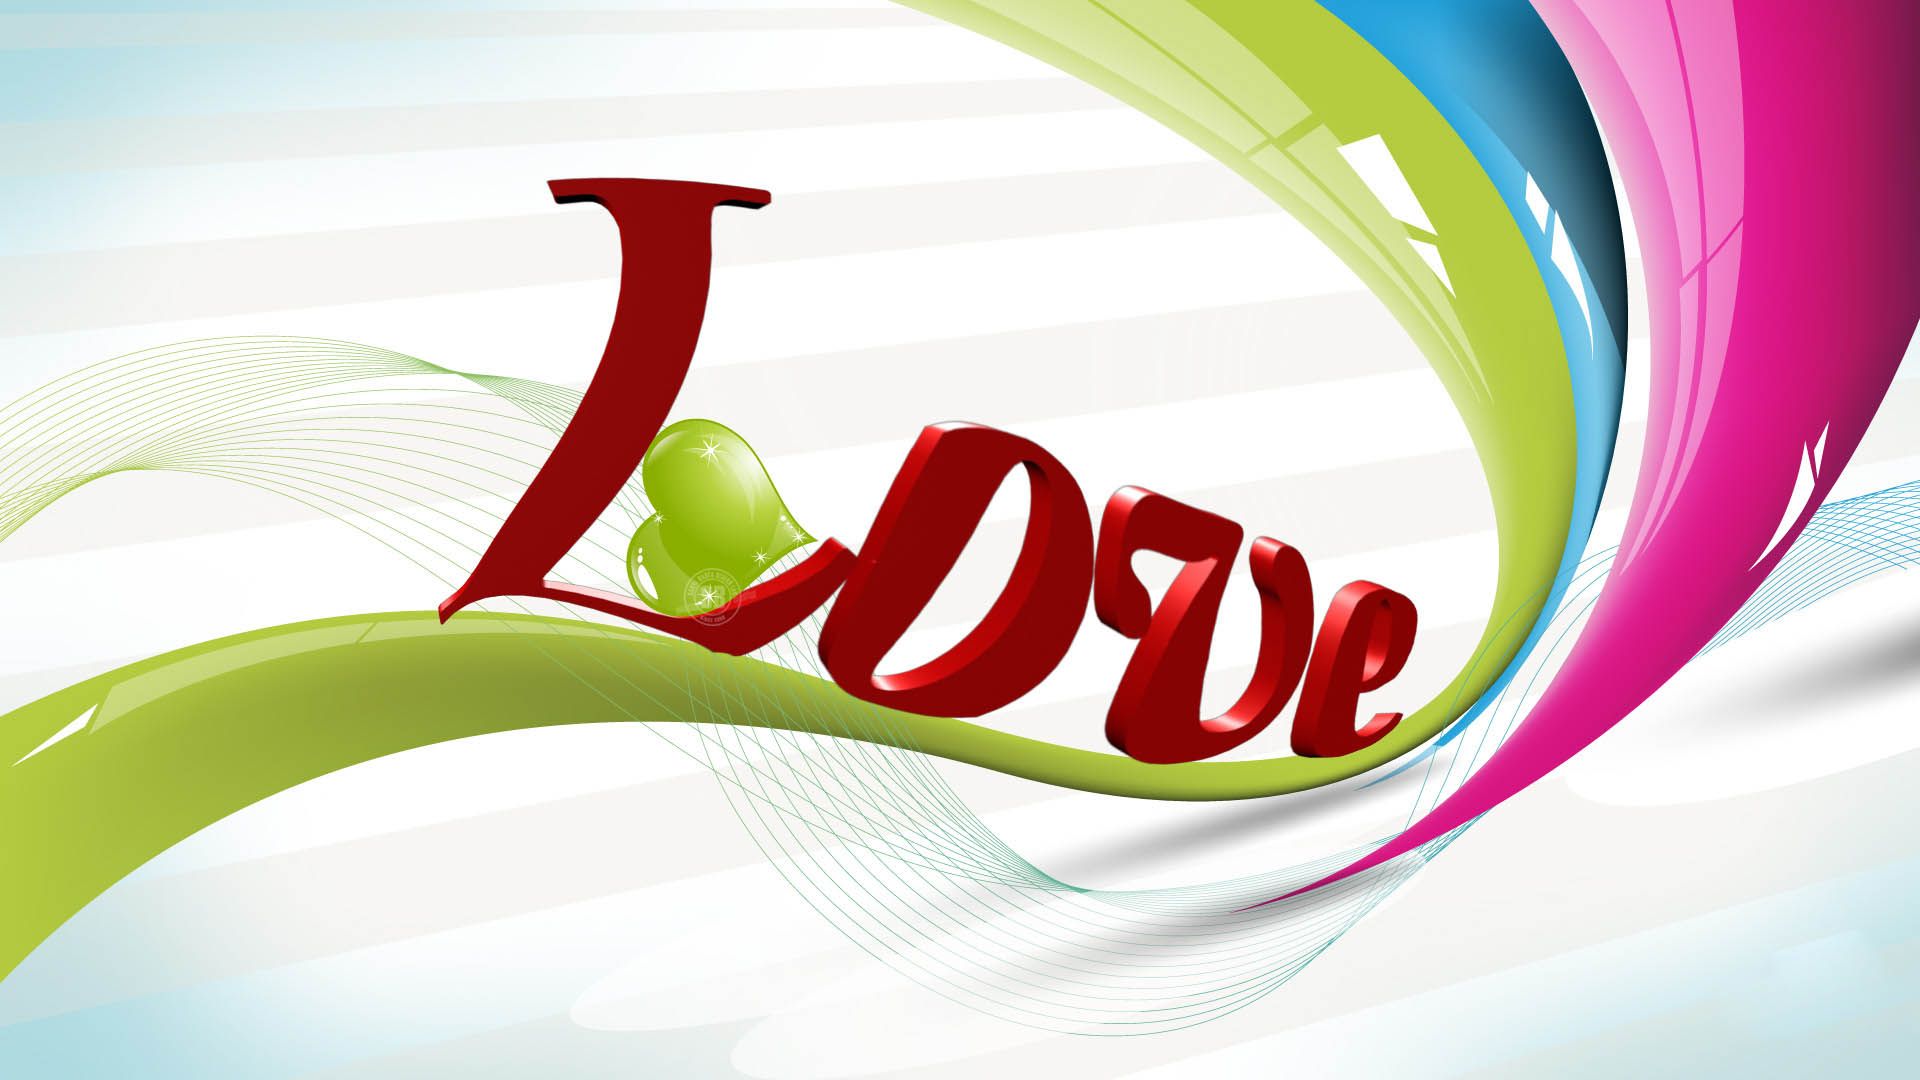 New Love Wallpaper Download | Live HD Wallpaper HQ Pictures ...